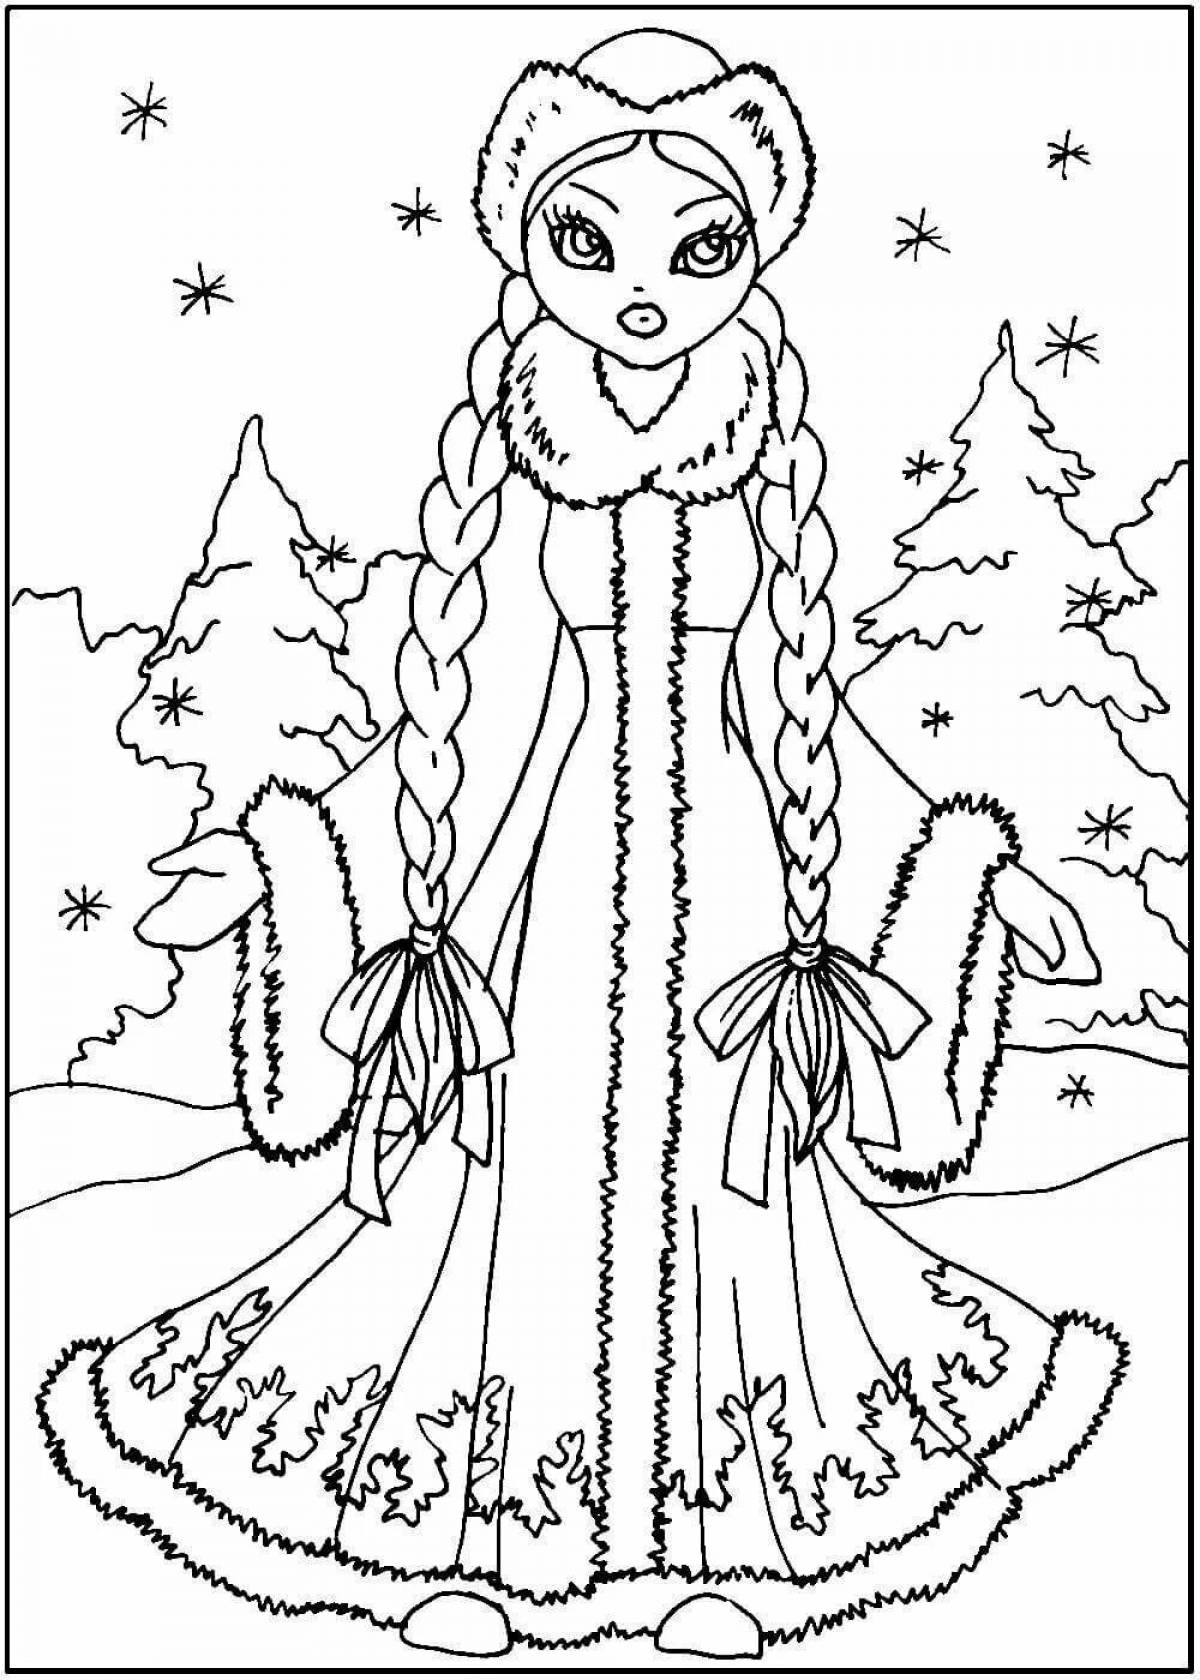 Great snow maiden coloring page